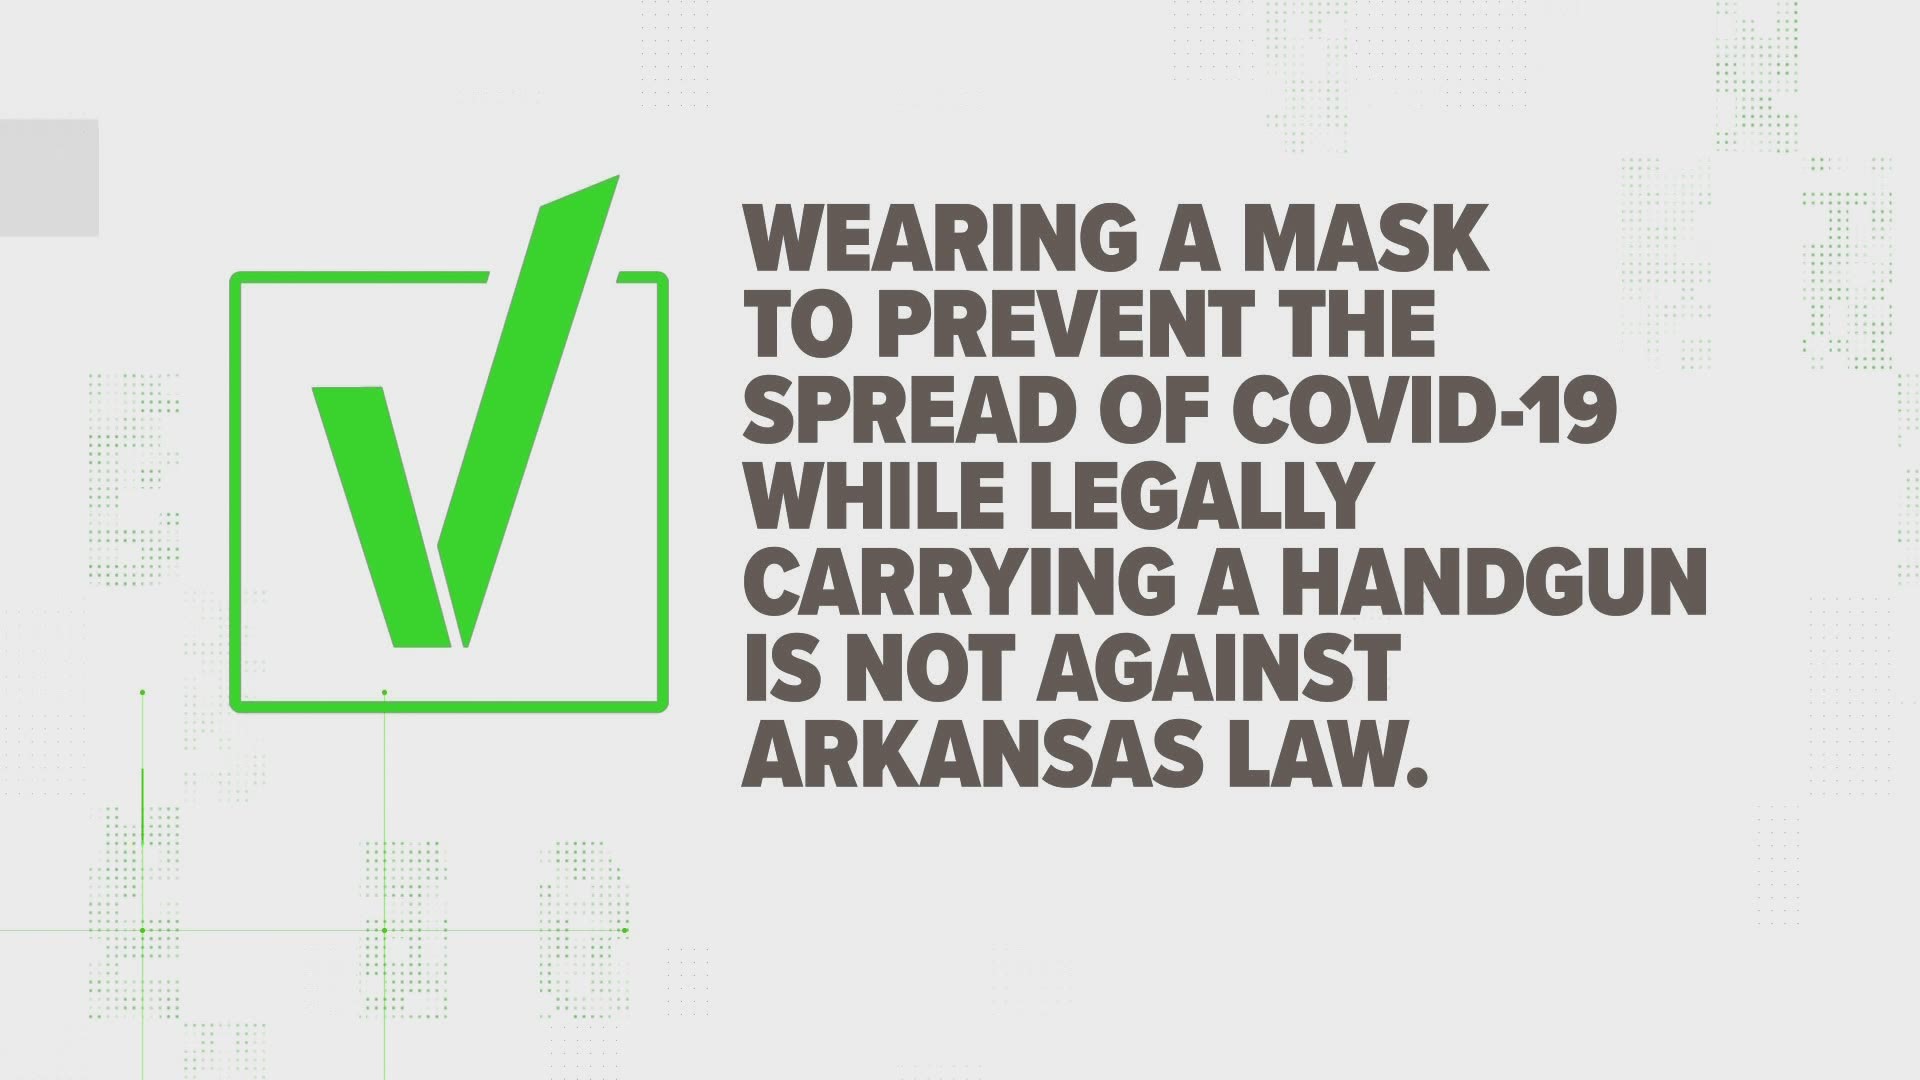 "If you have a concealed handgun permit or you openly carry and you wear a mask, will you get a felony charge?"